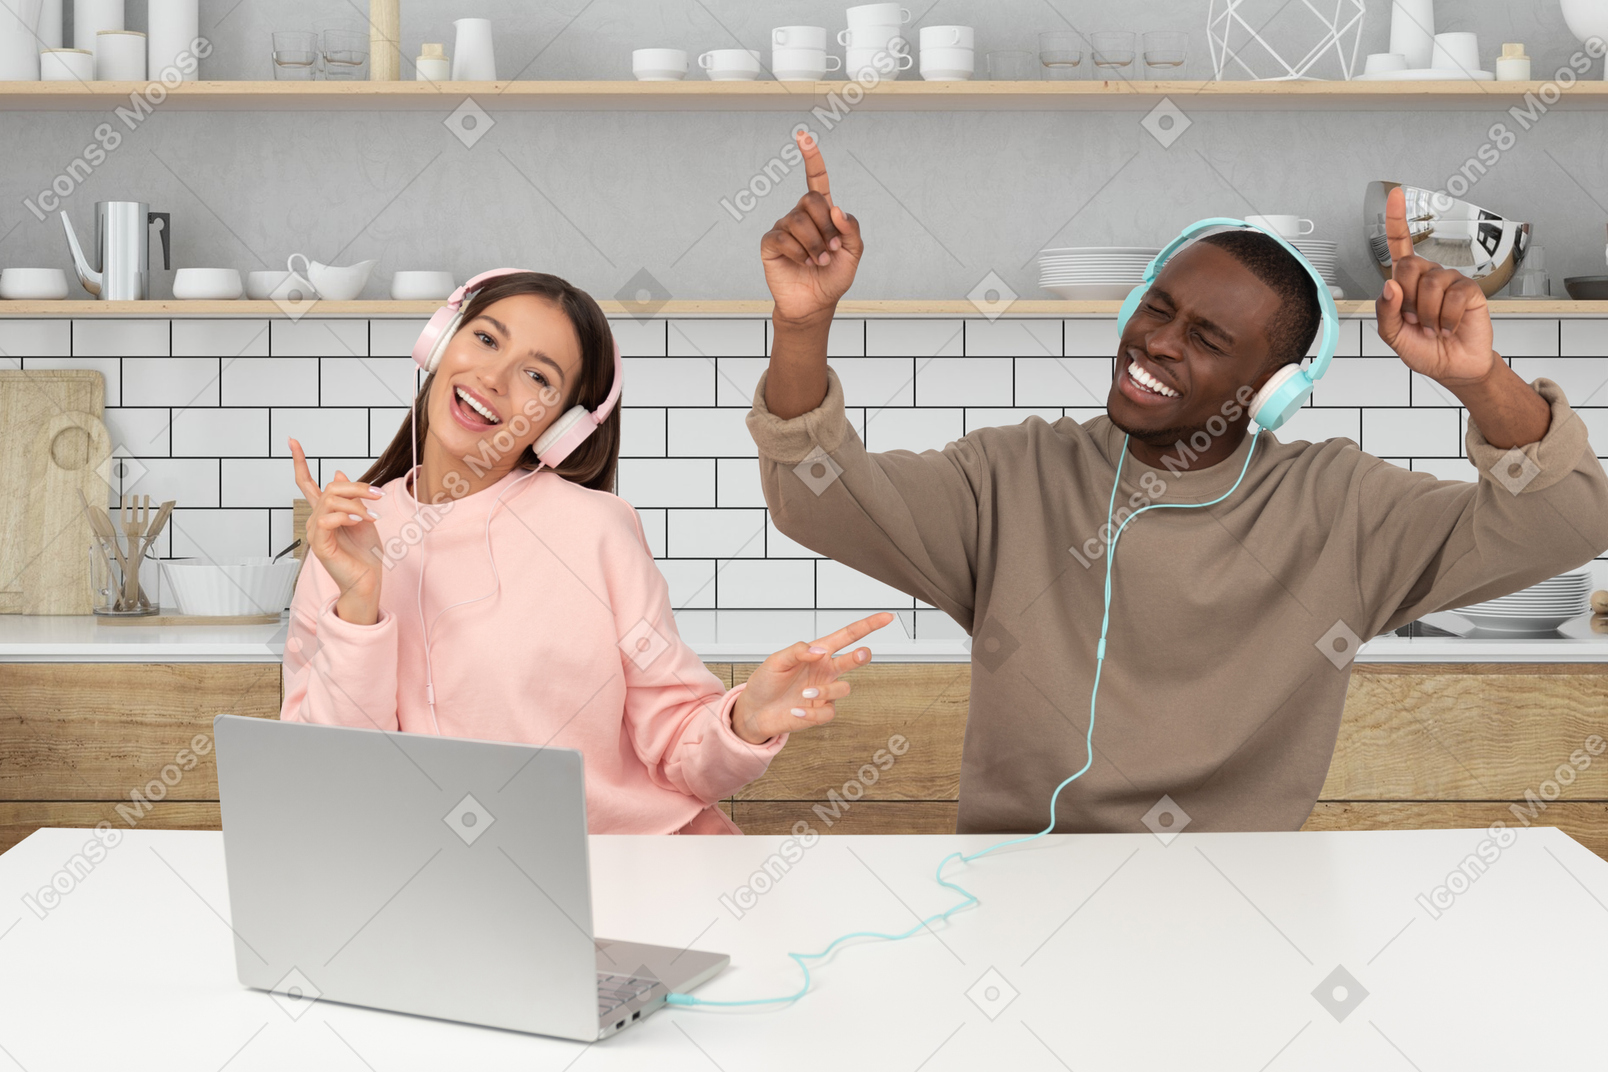 A man and woman listening to music in a kitchen